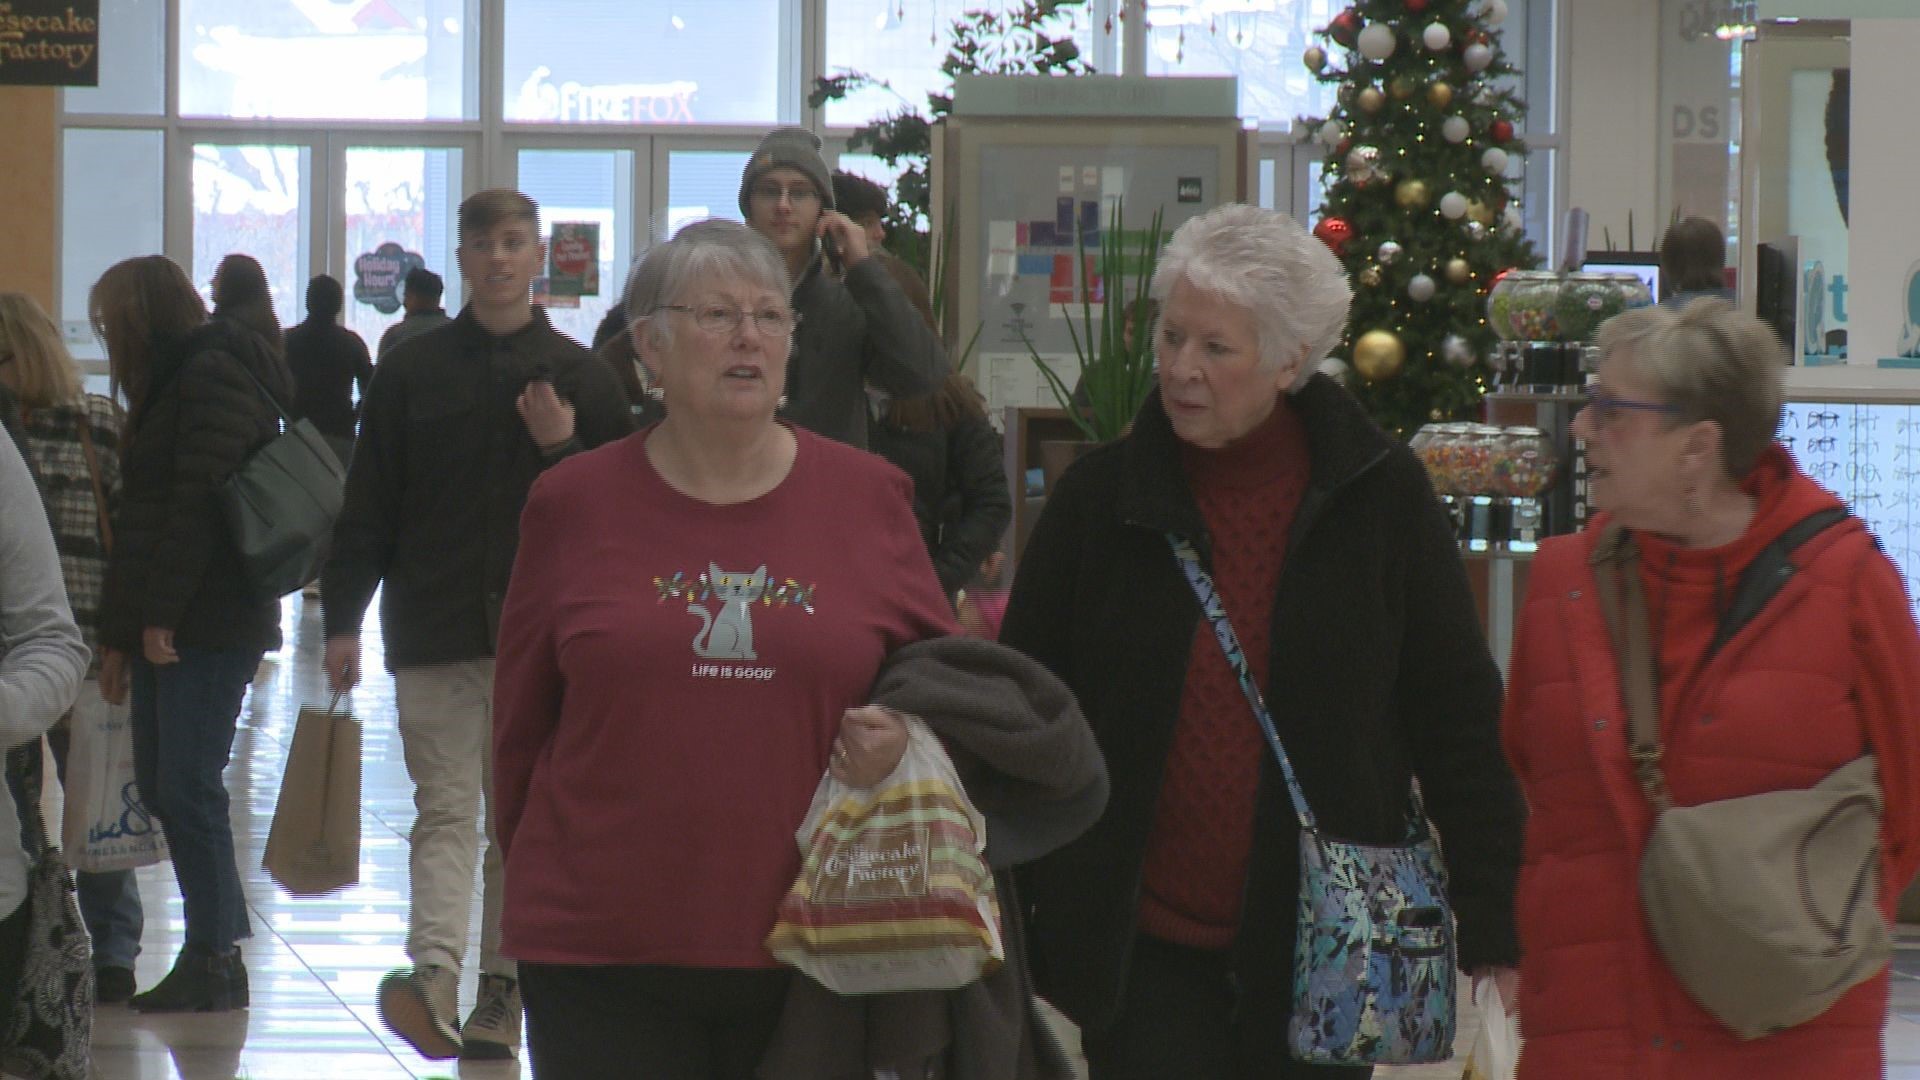 People at the Woodland Mall are getting some last minute gift shopping done, as well as making some fun holiday memories.